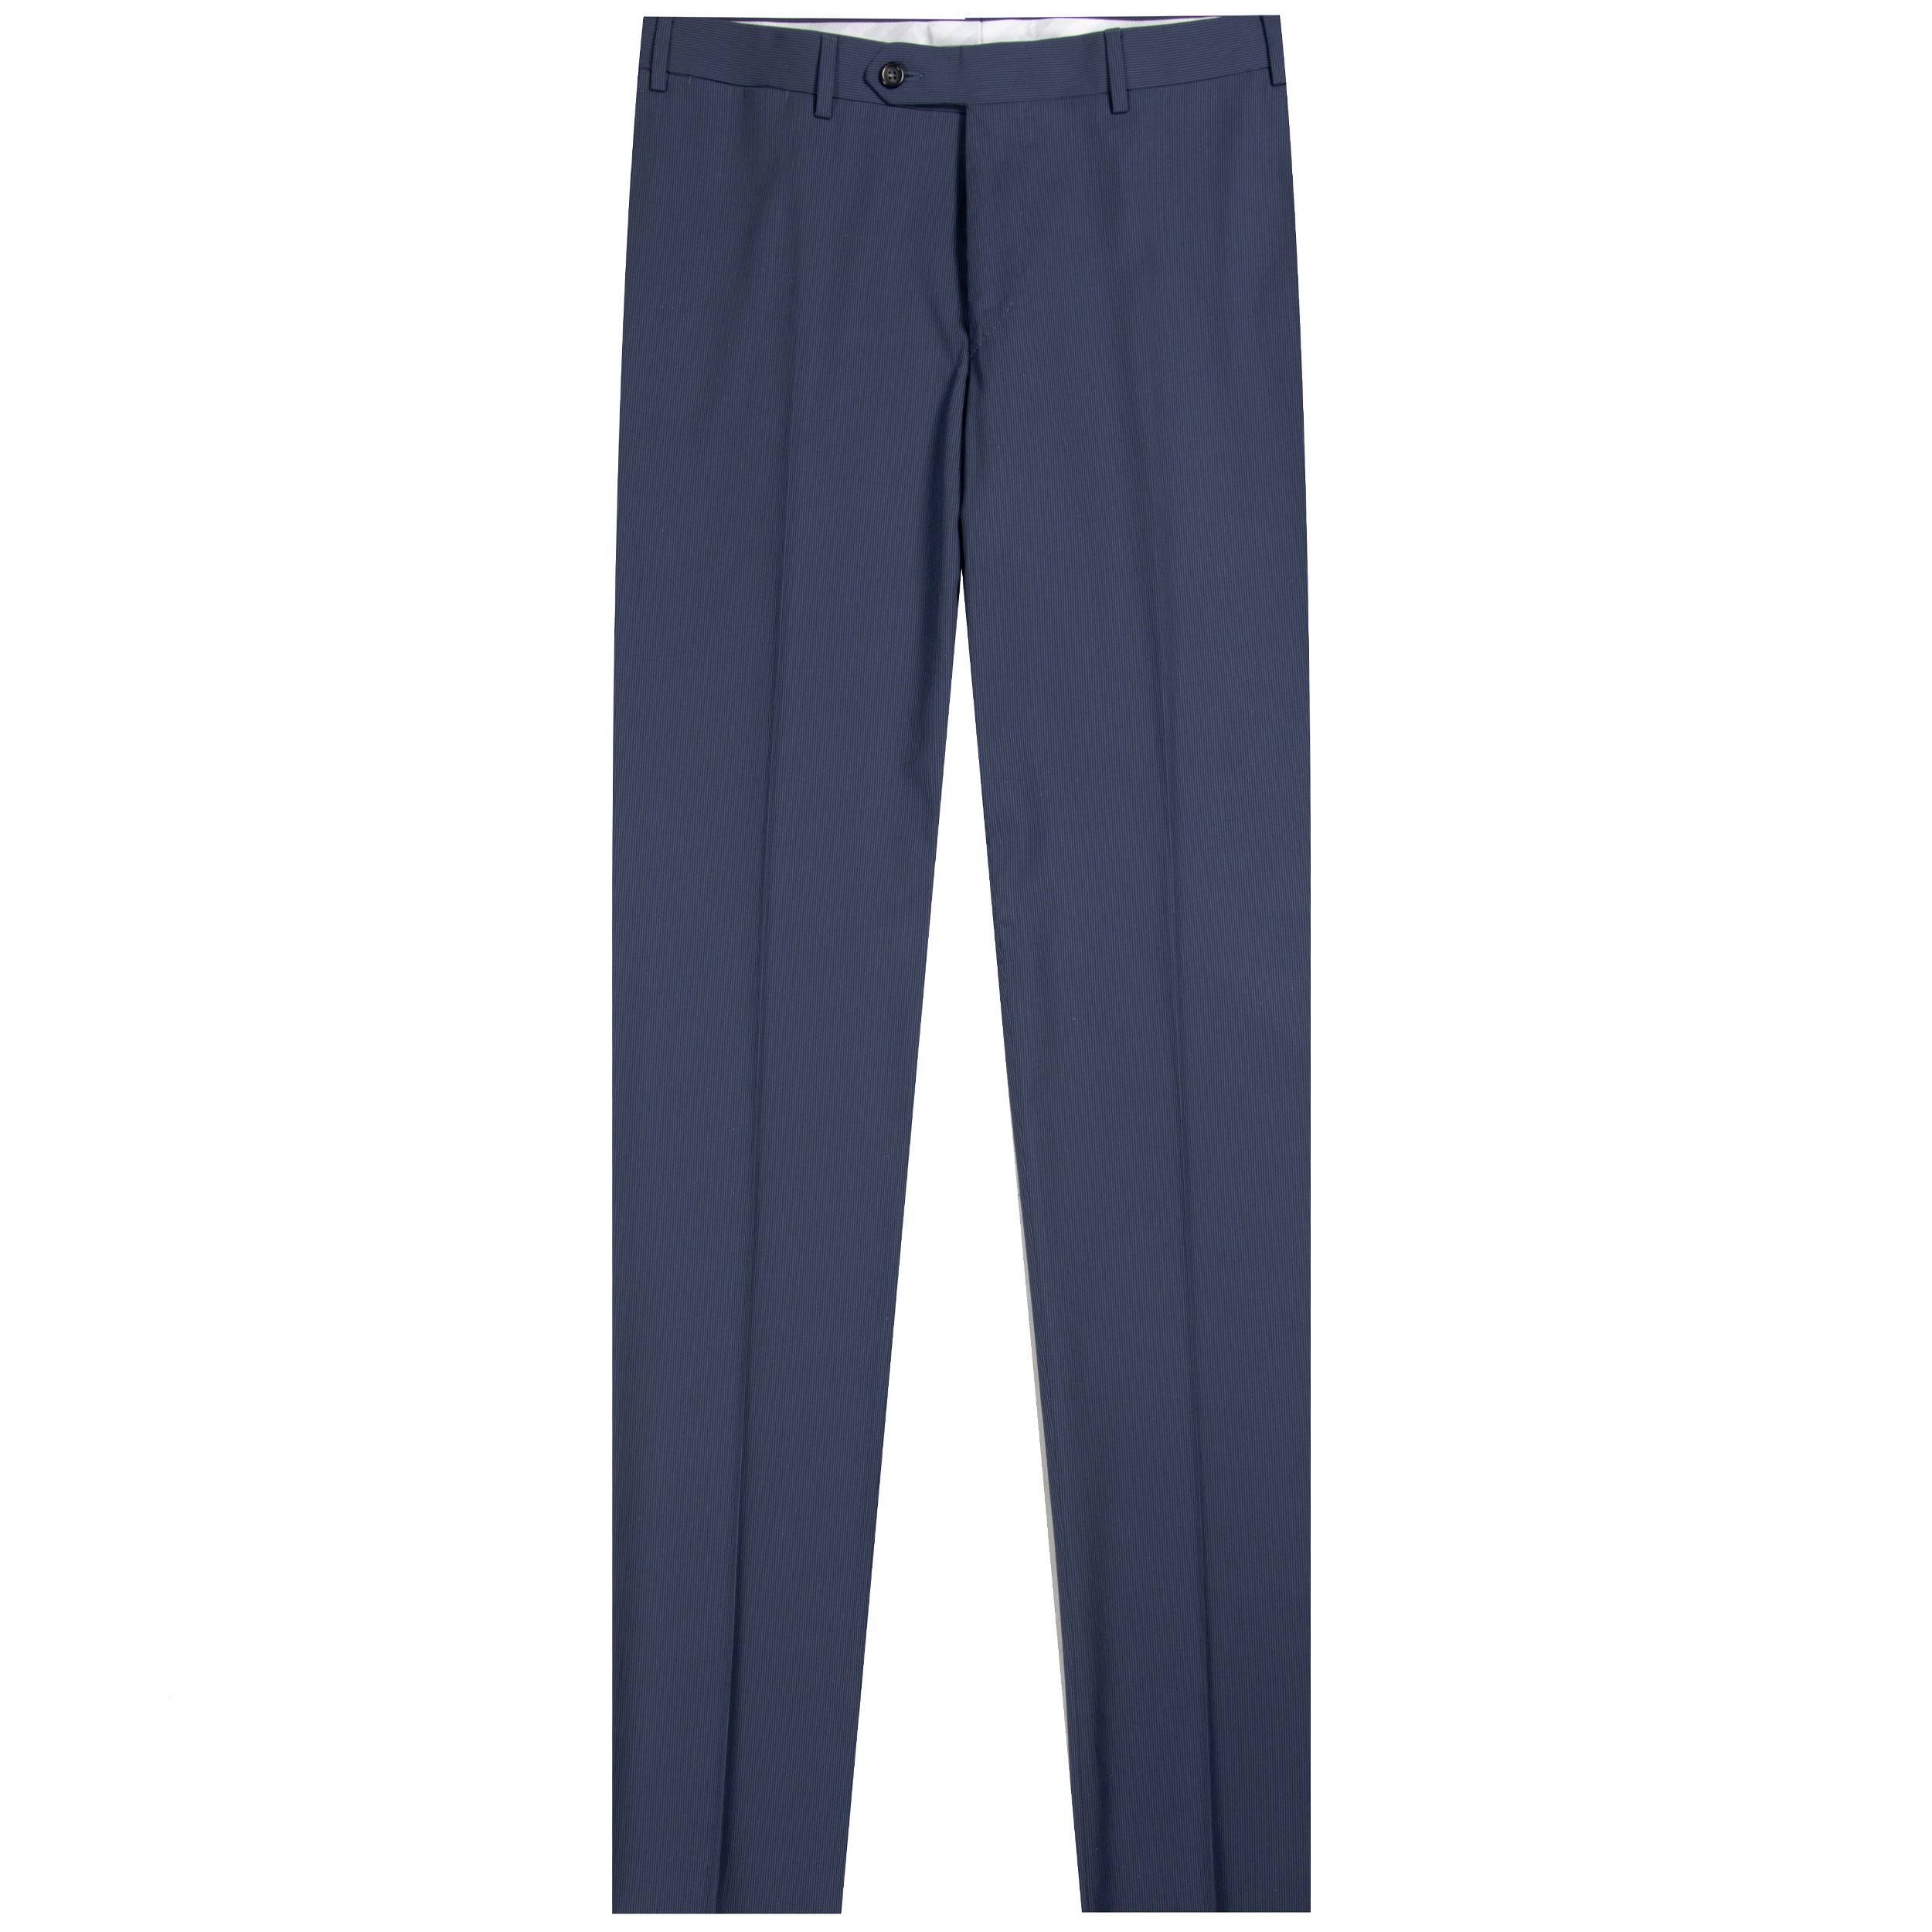 Canali Hairline Striped Trouser Navy